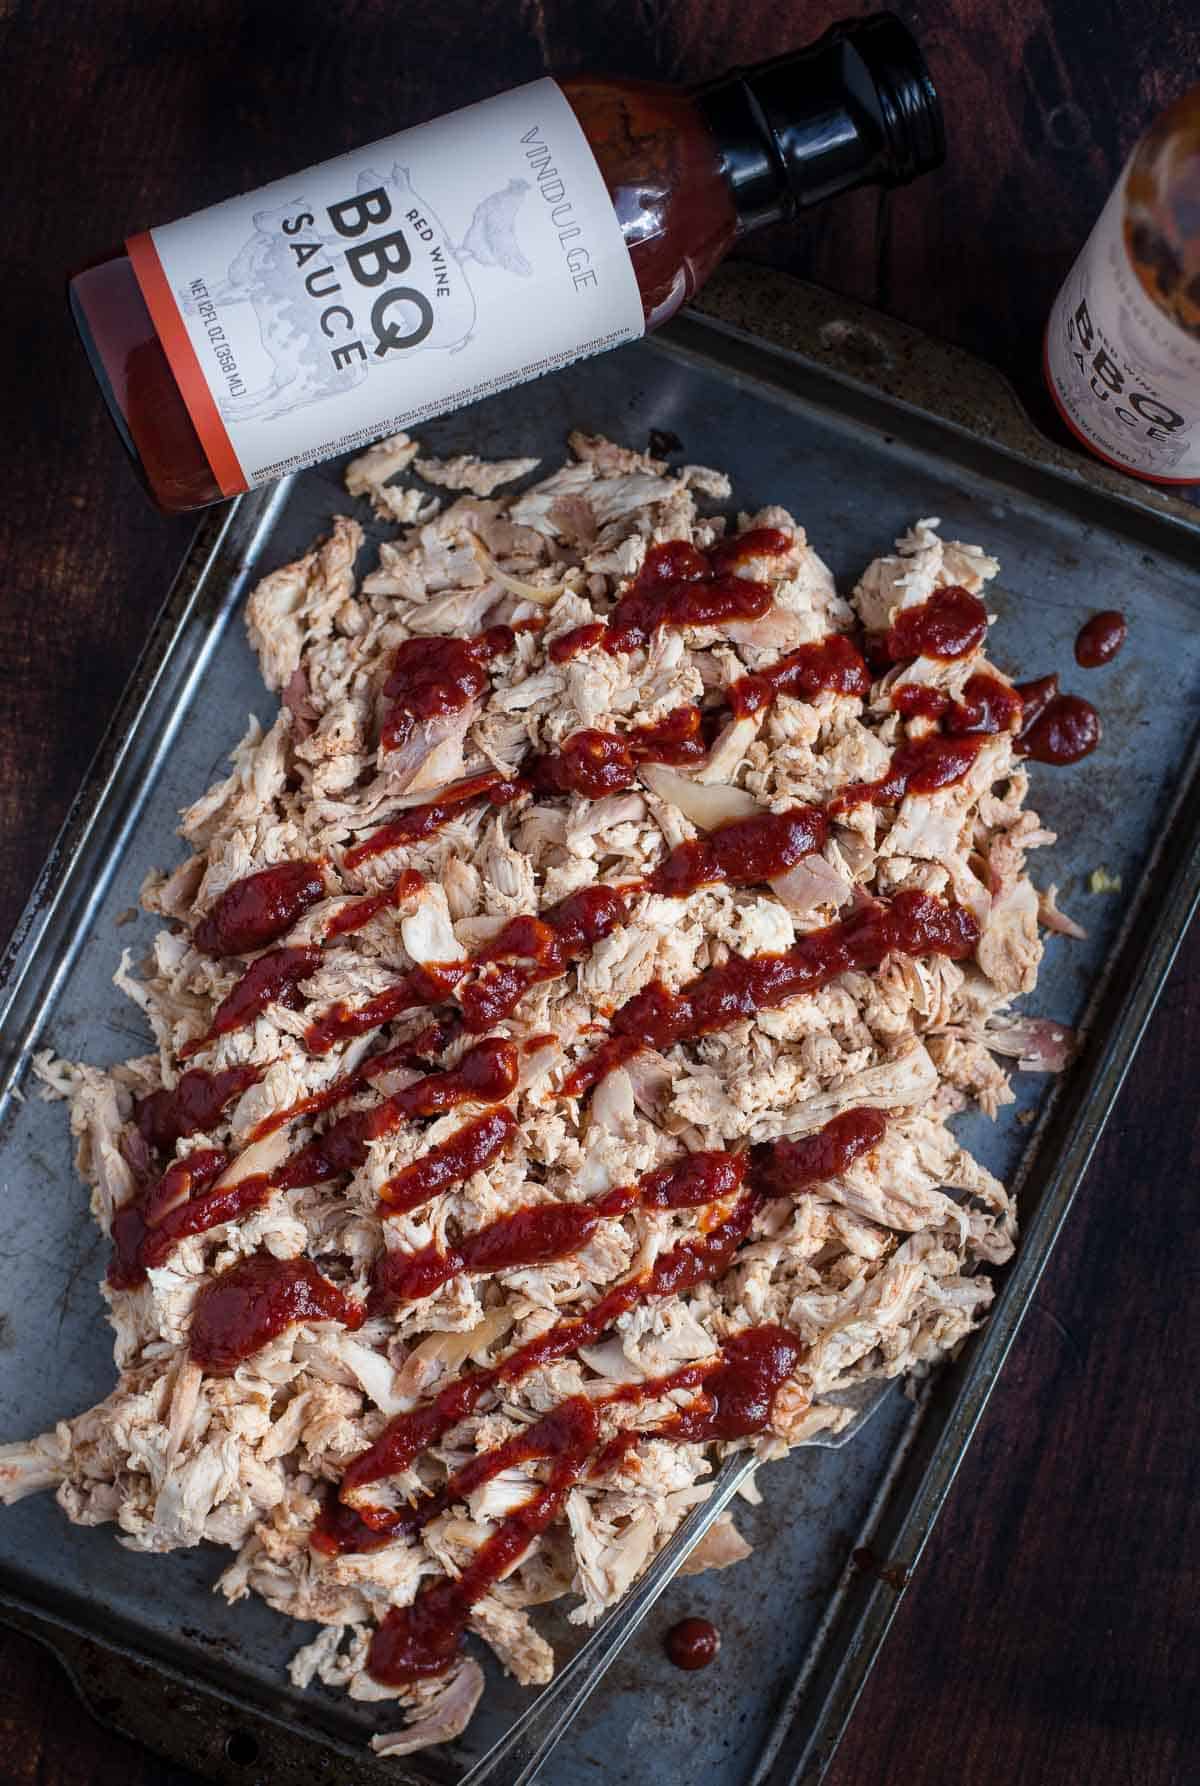 Red Wine Sauced Pulled chicken from Vindulge featuring their red wine bbq sauce bottle.